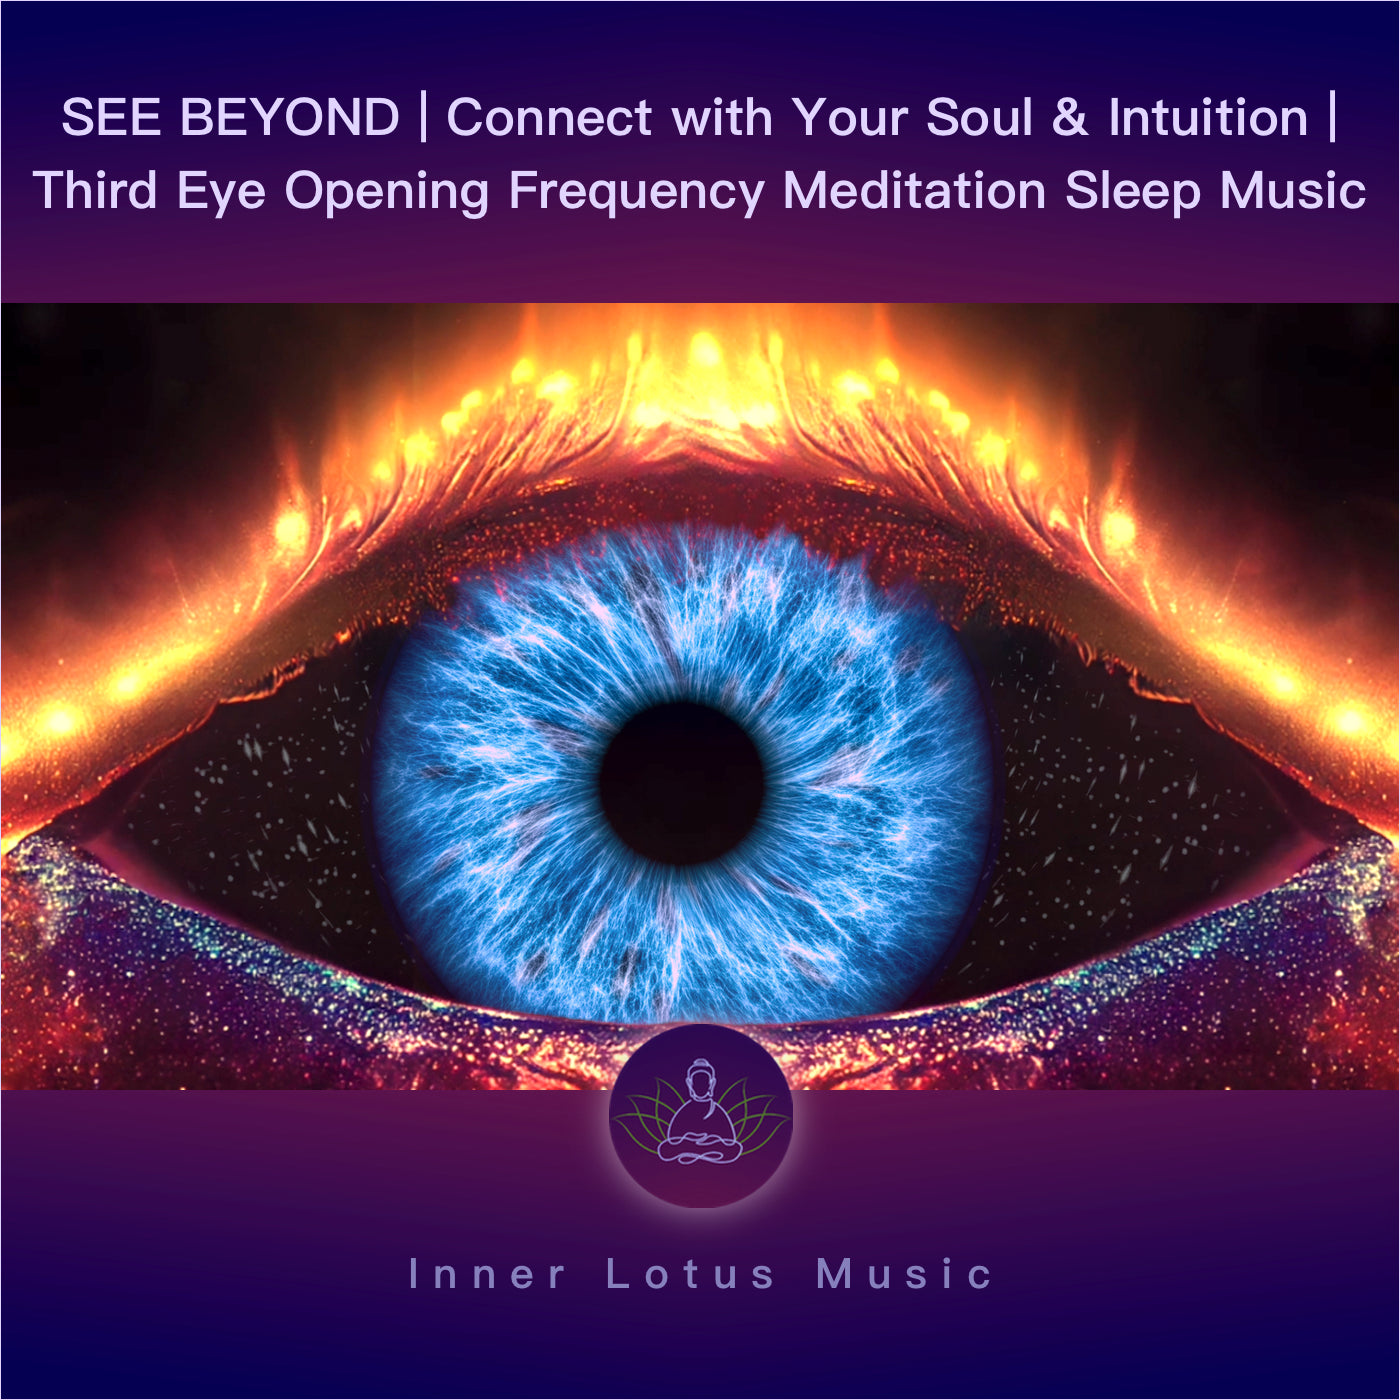 SEE BEYOND | Connect with Your Soul & Intuition | Third Eye Opening Frequency Meditation Sleep Music